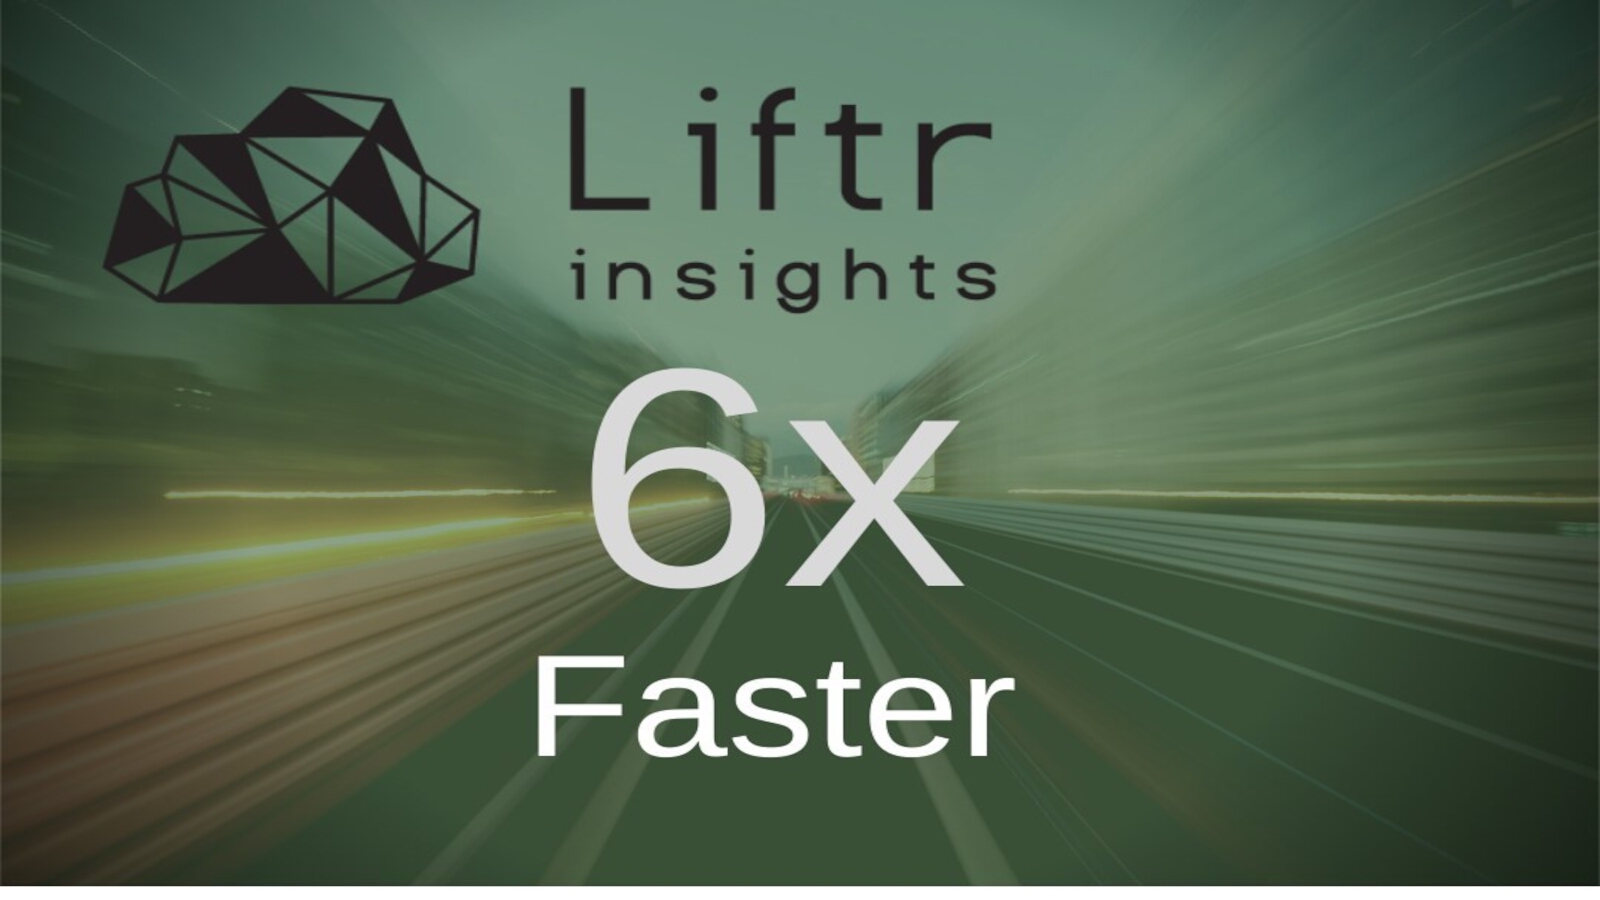 Liftr Insights Increases Cadence of Data 6x Faster than Competition